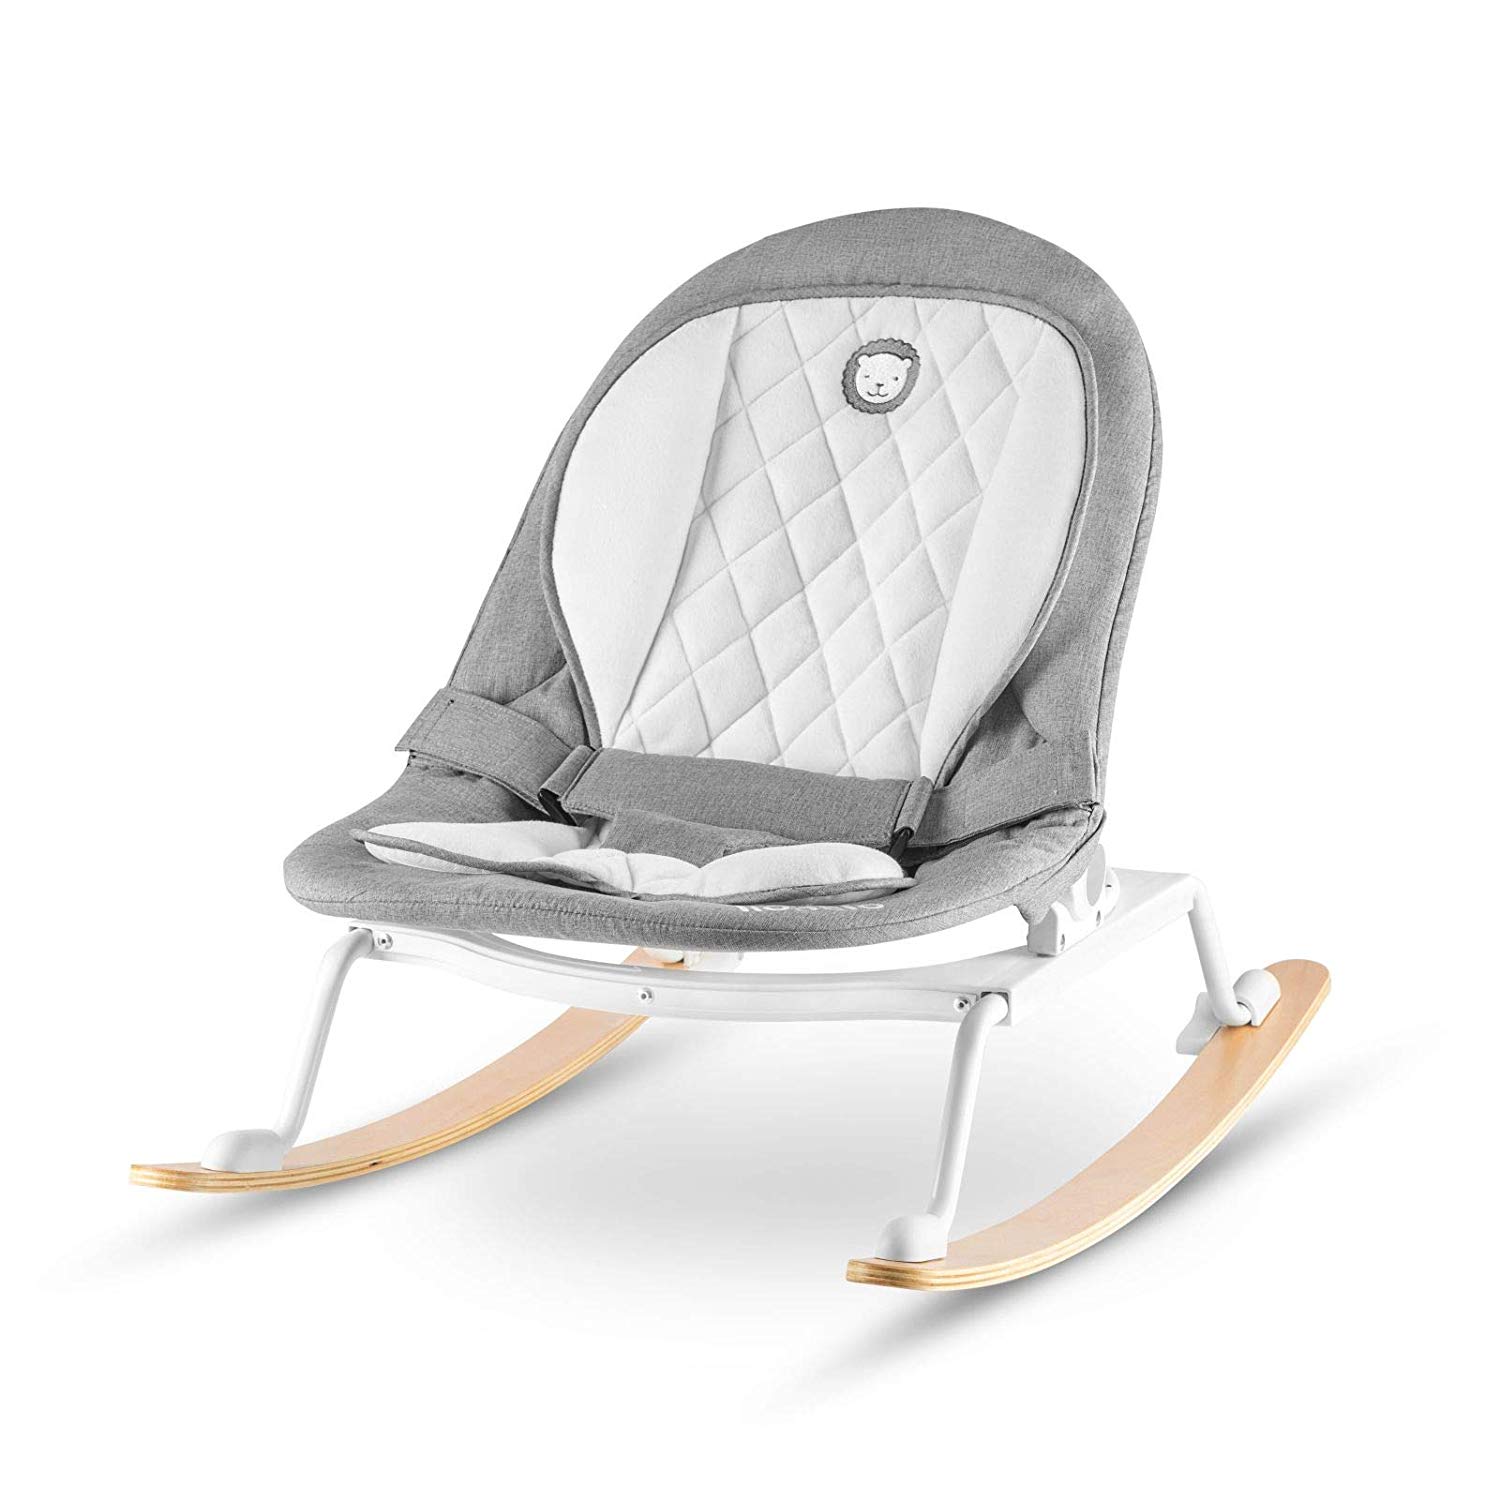 Lionelo Pink Baby Rocker Baby Swing from Birth to 9 kg Insert for Newborns Wooden Runners Reclining Position Seat 90 Degree Rotatable Scandinavian Design Foldable Grey / White